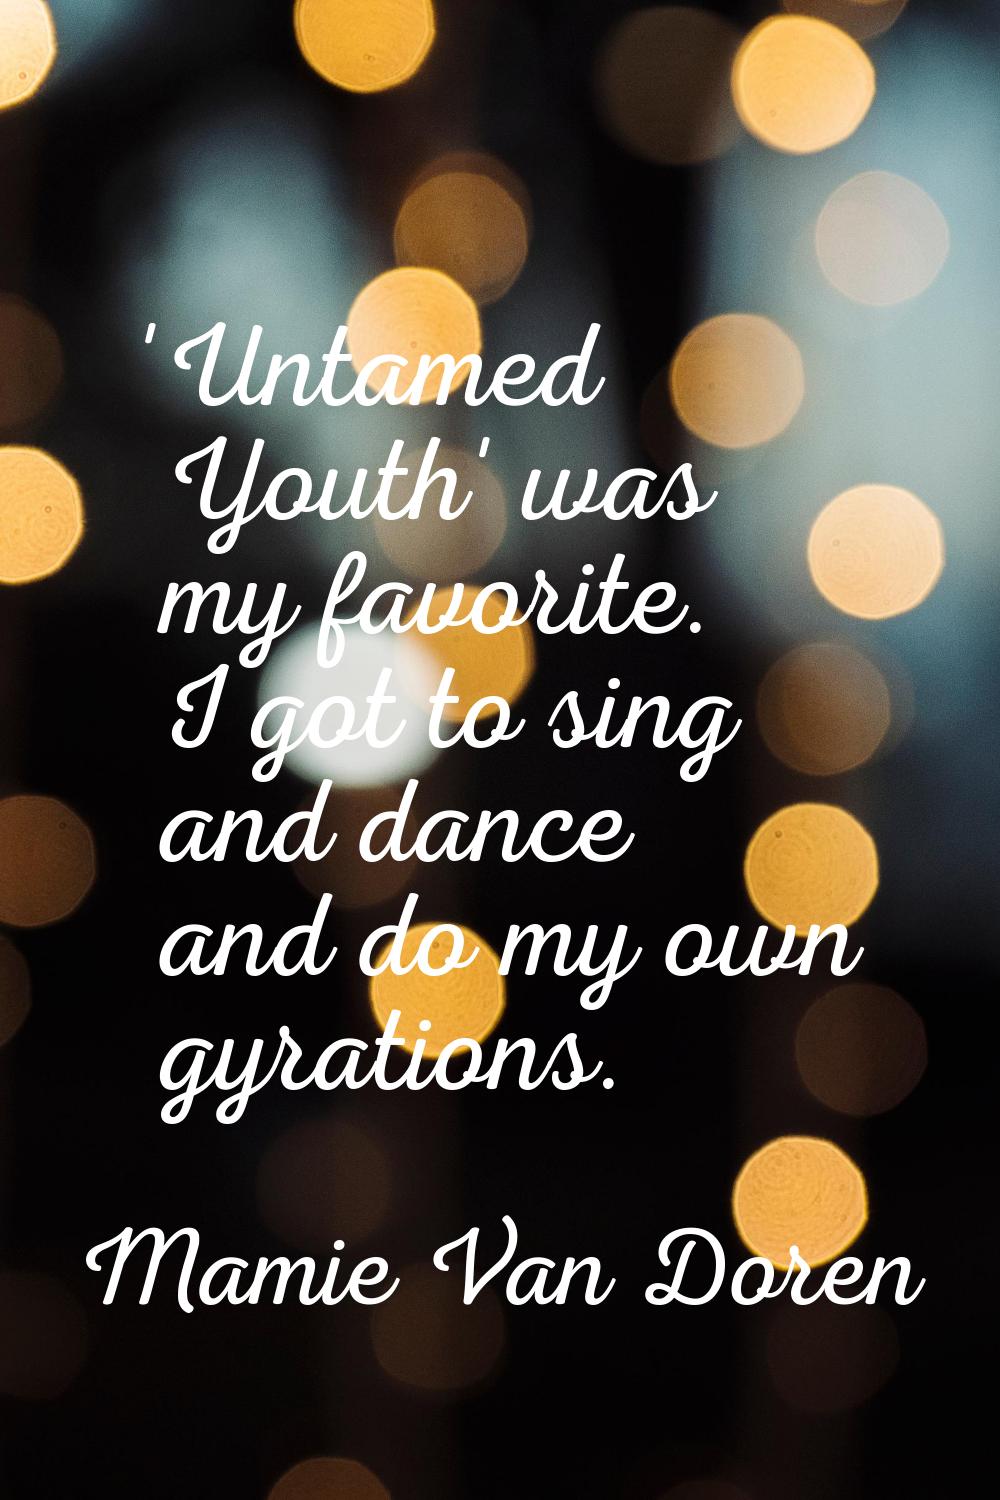 'Untamed Youth' was my favorite. I got to sing and dance and do my own gyrations.